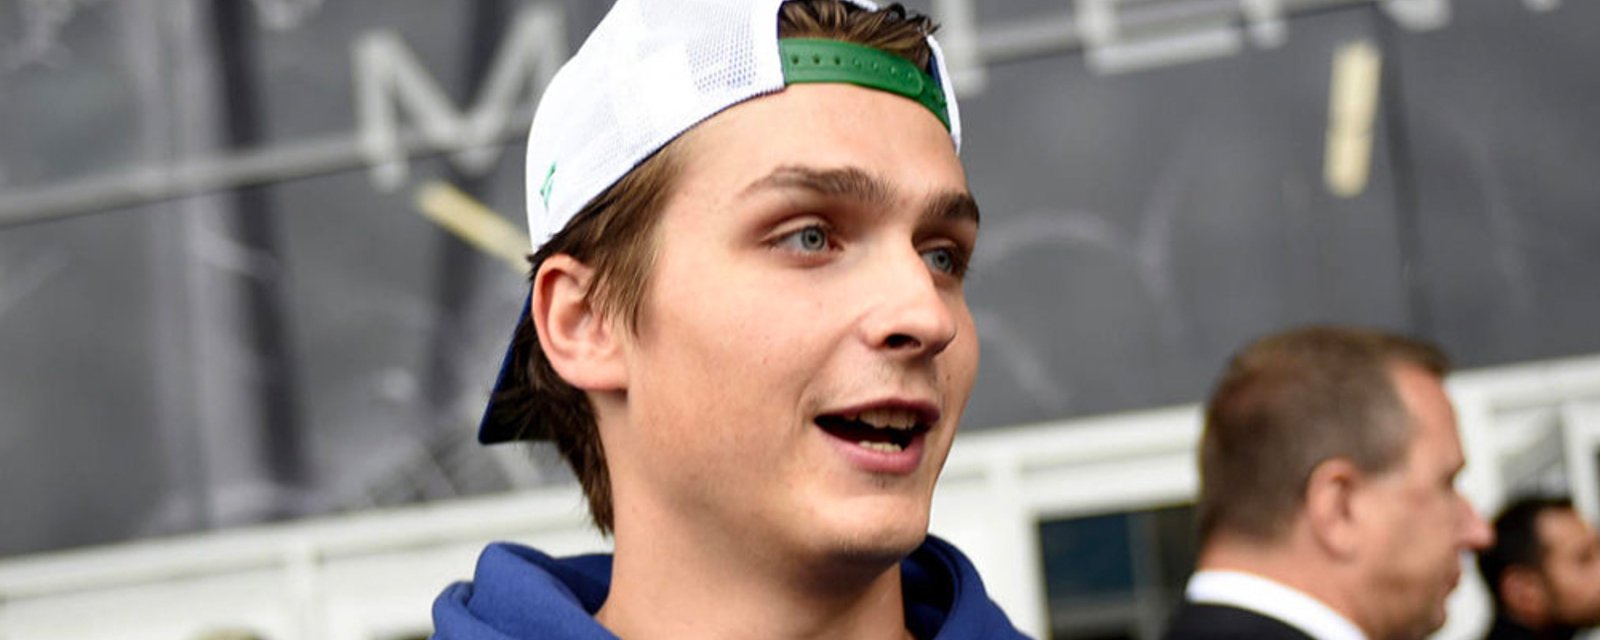 Jake Virtanen named in sexual misconduct lawsuit